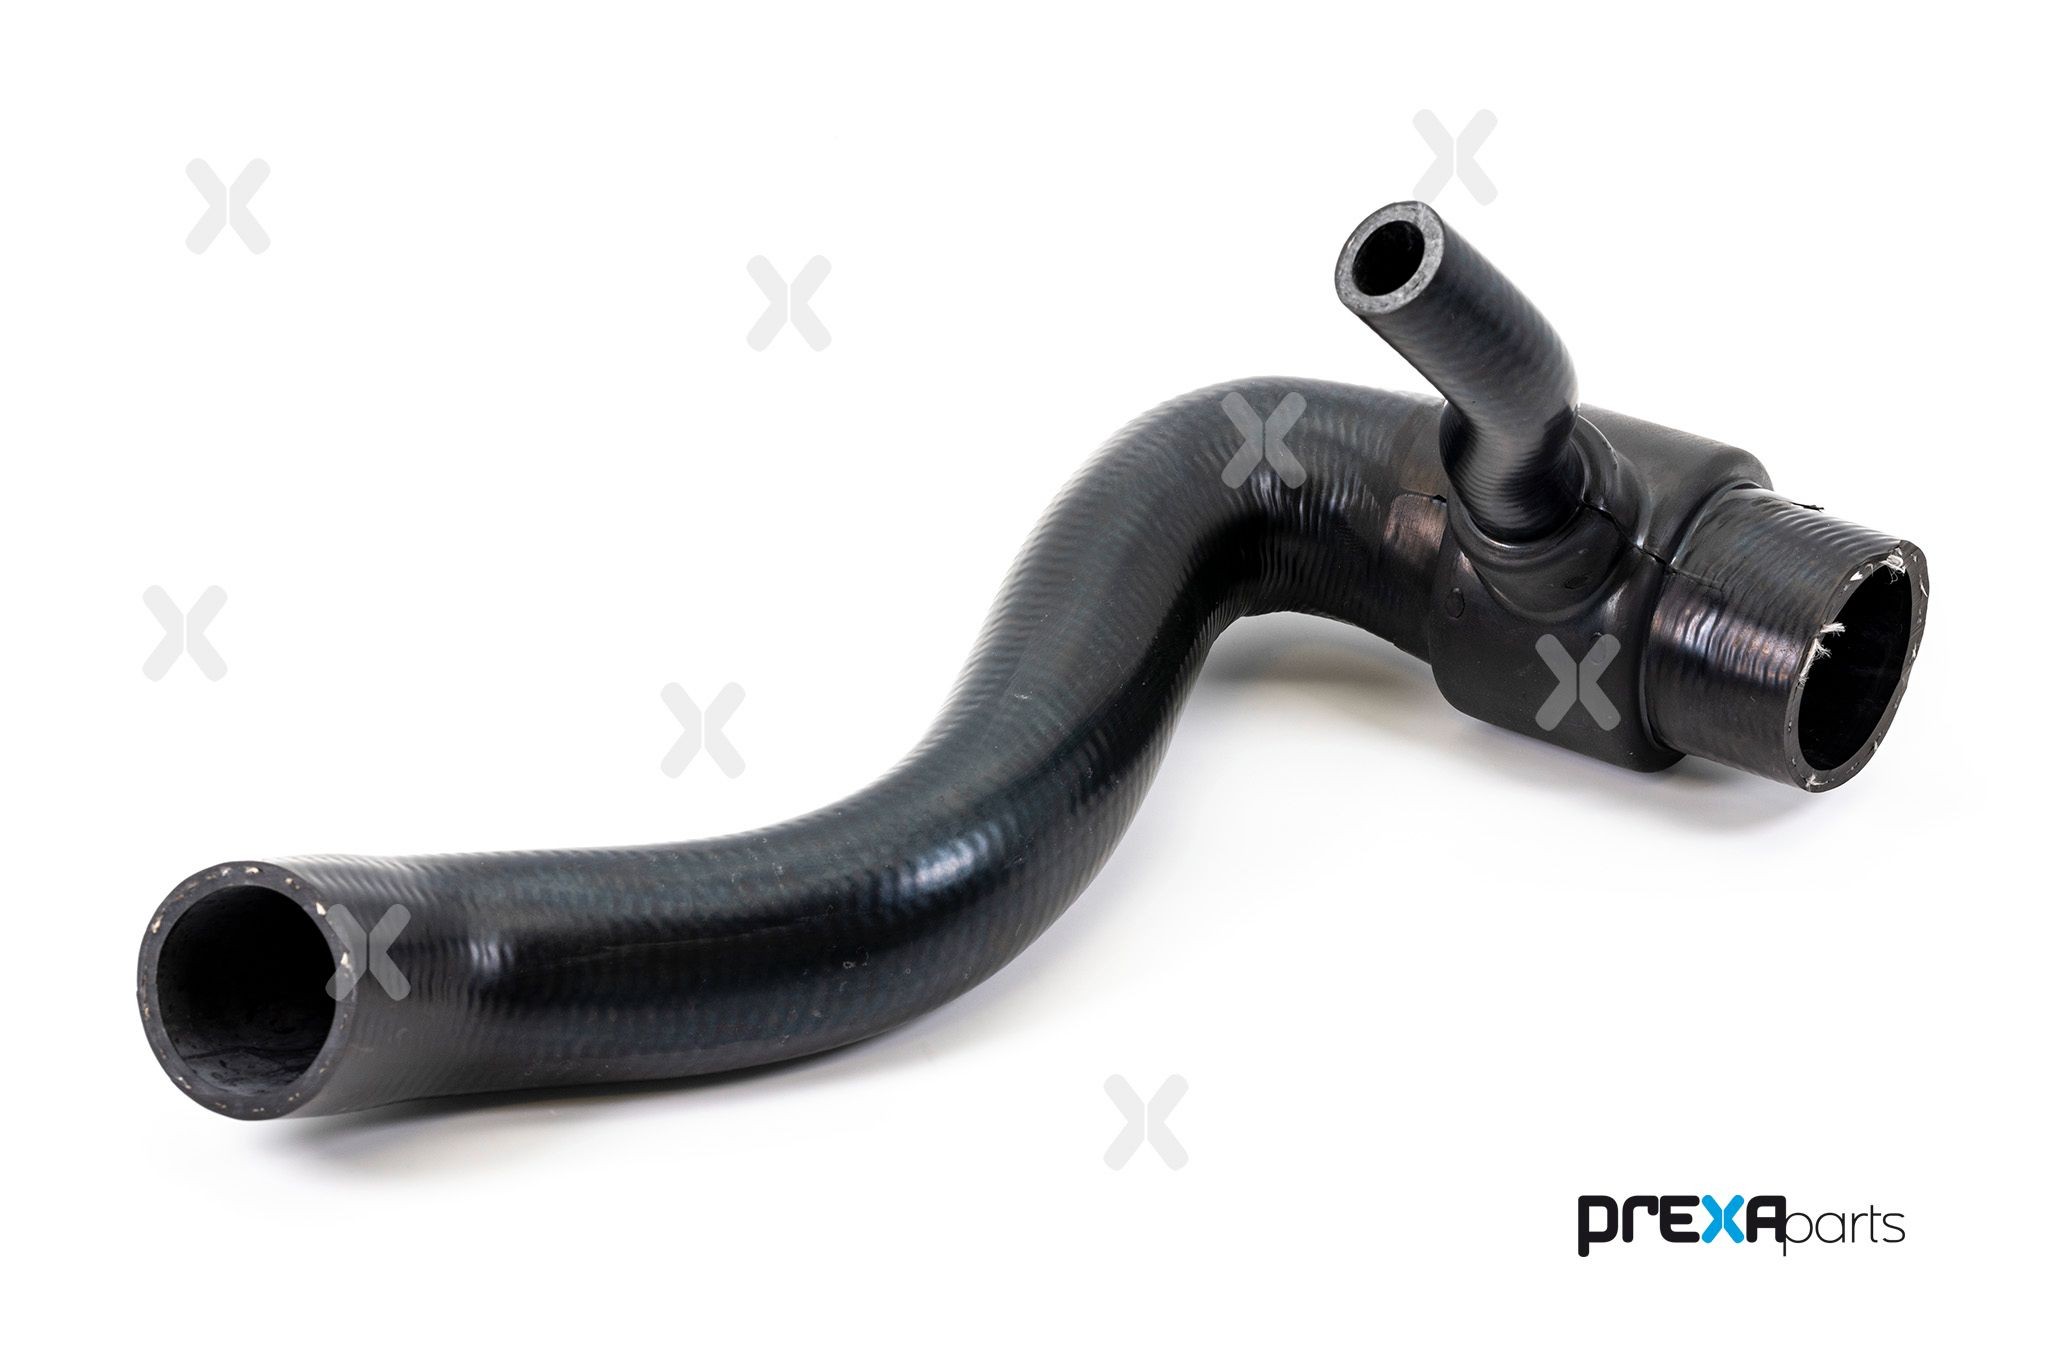 P326218 Radiator Hose PREXAparts P326218 review and test